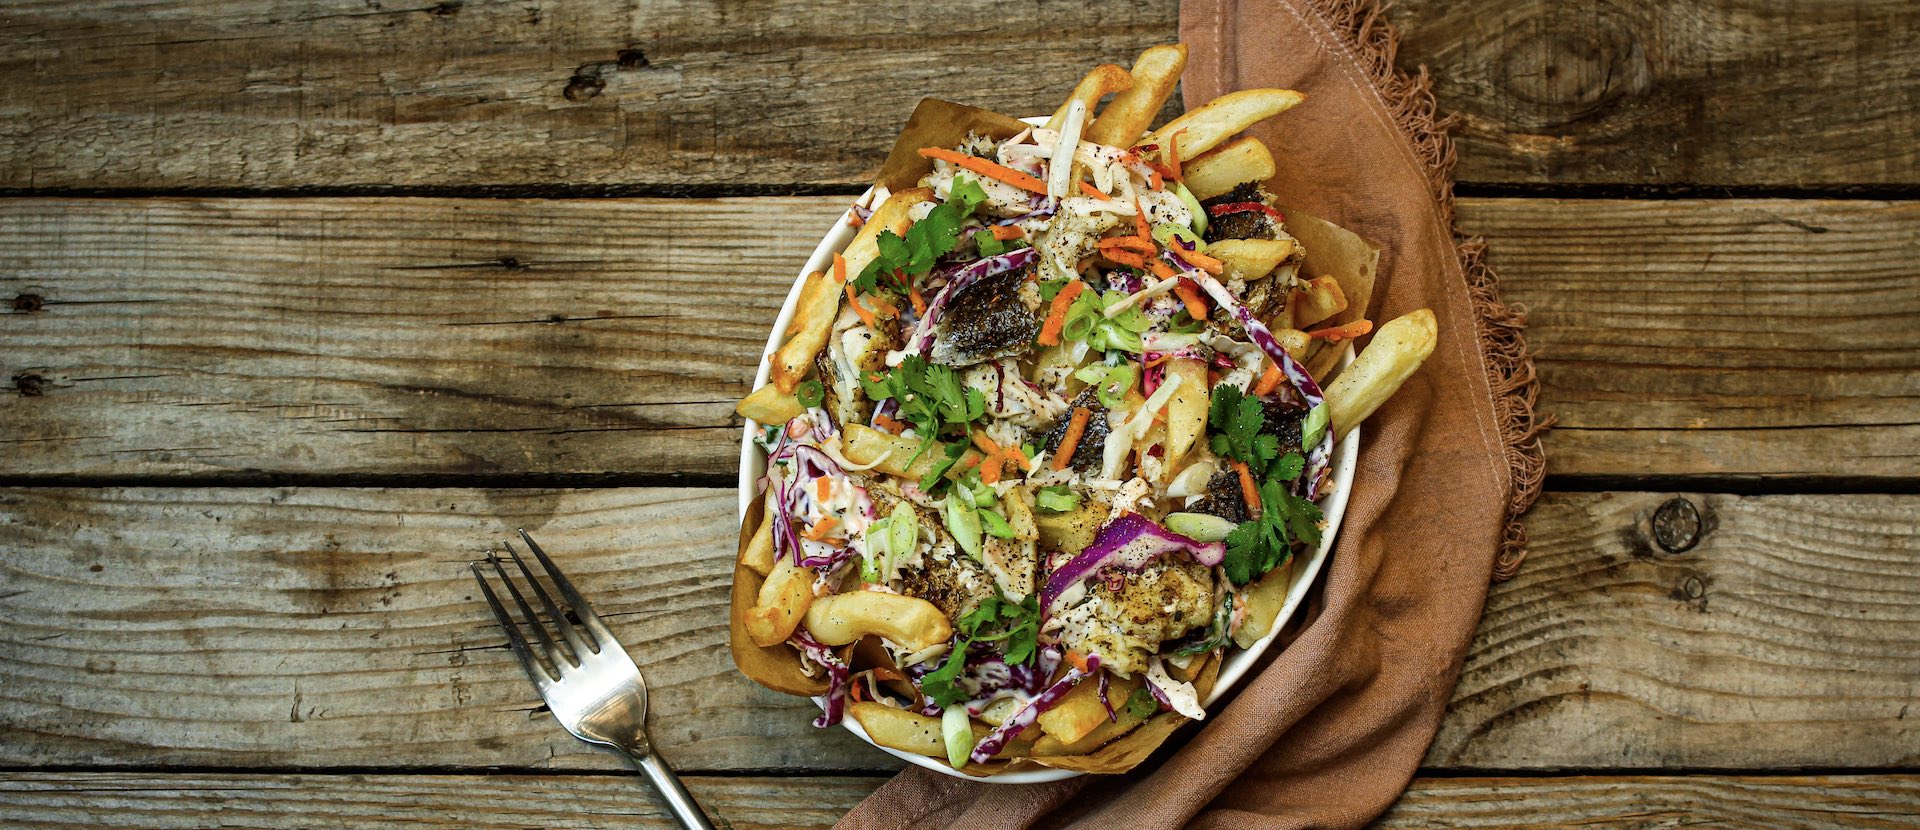 Grilled Fish Loaded Fries